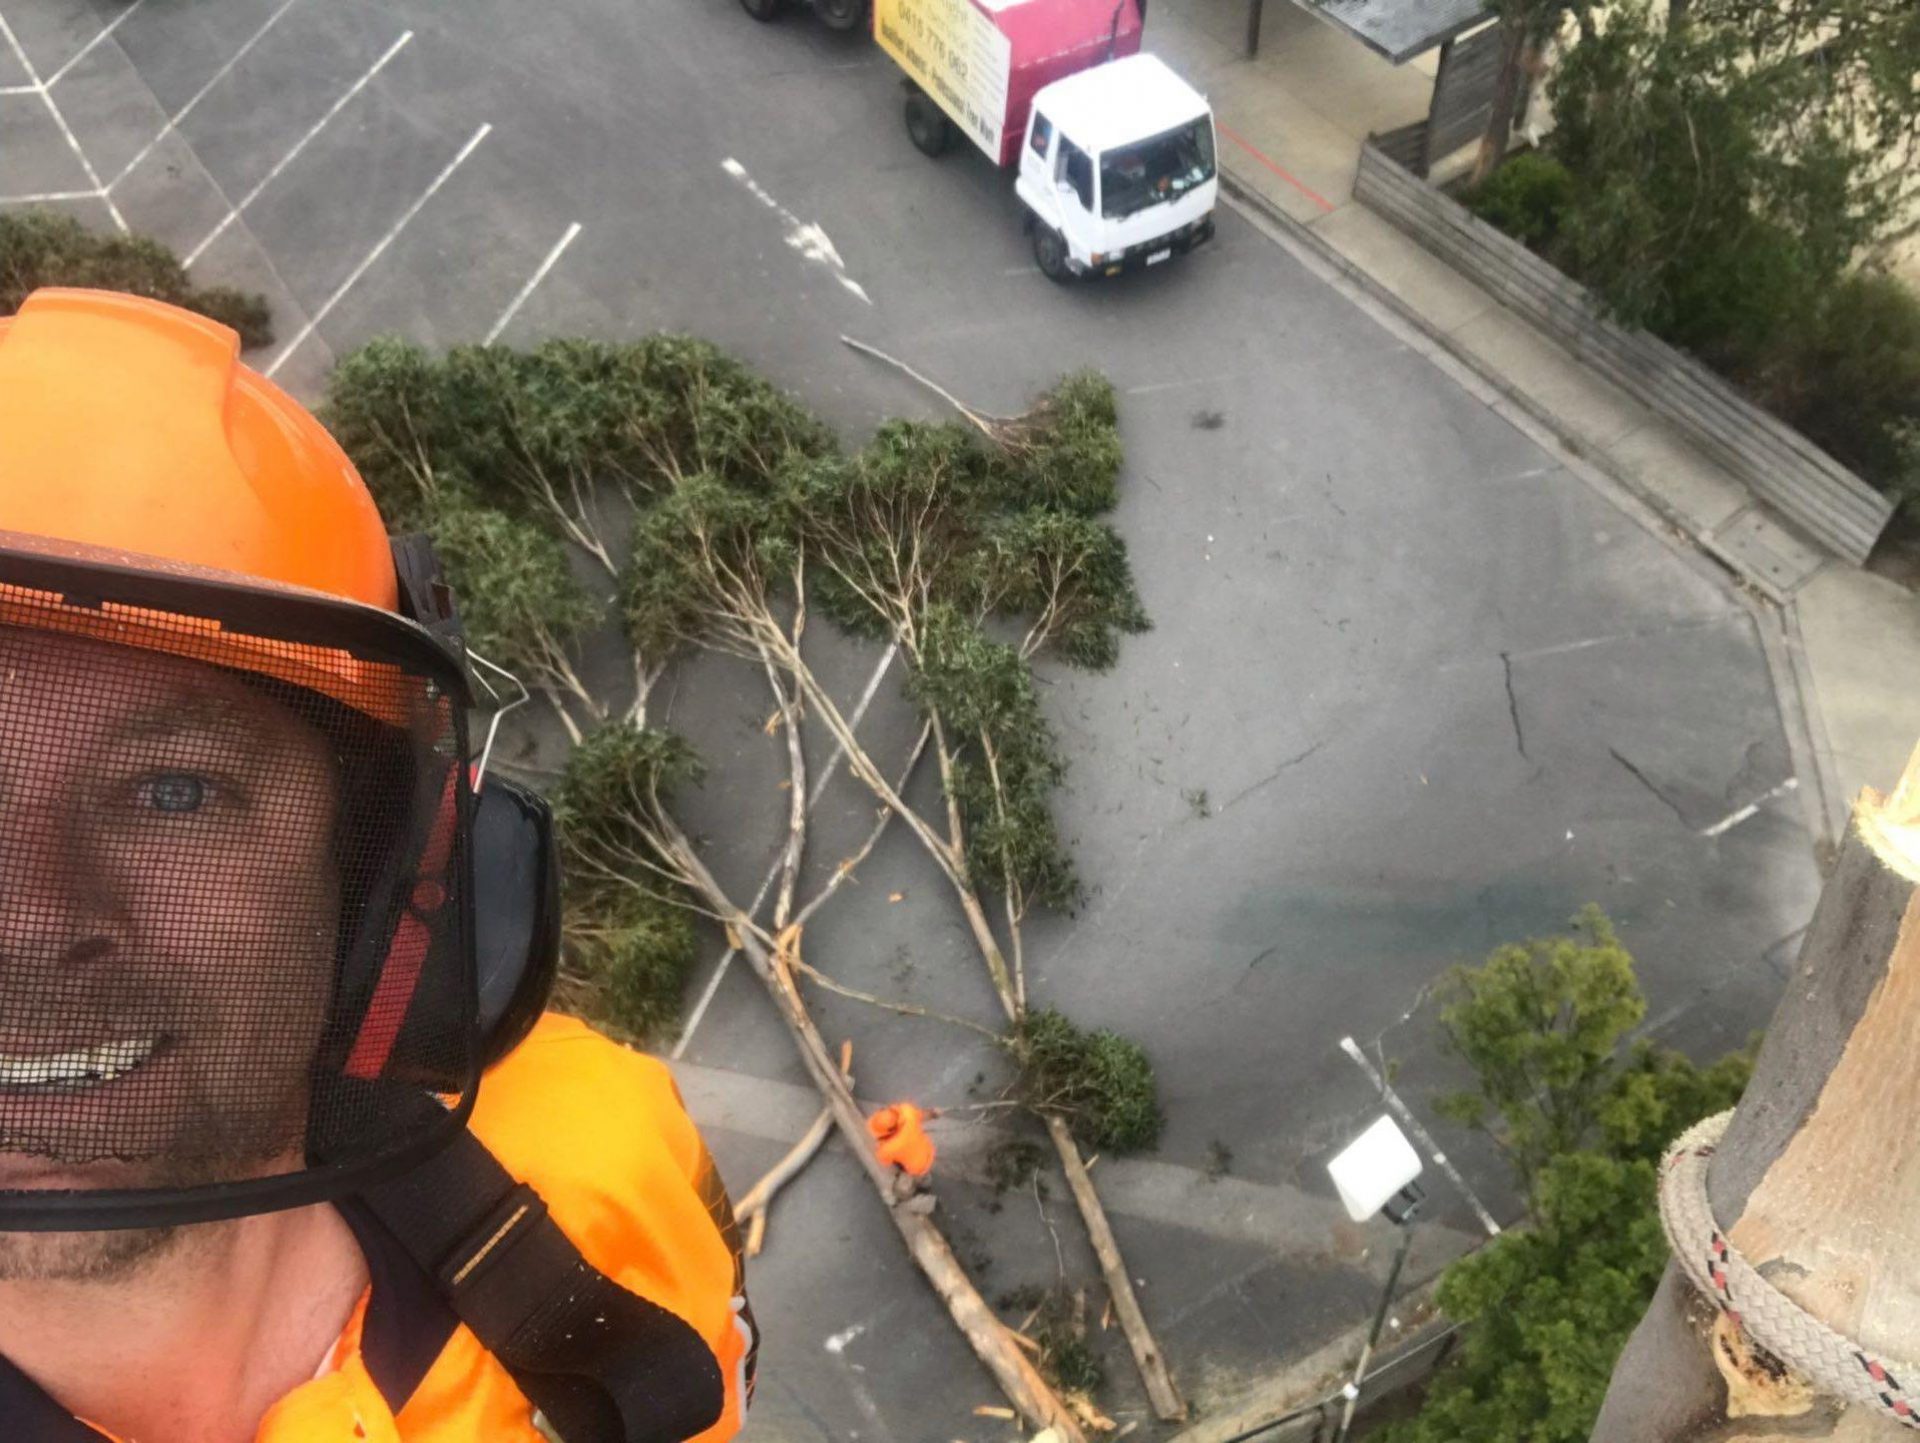 Why should you hire a professional for tree care company for tree removal or pruning.